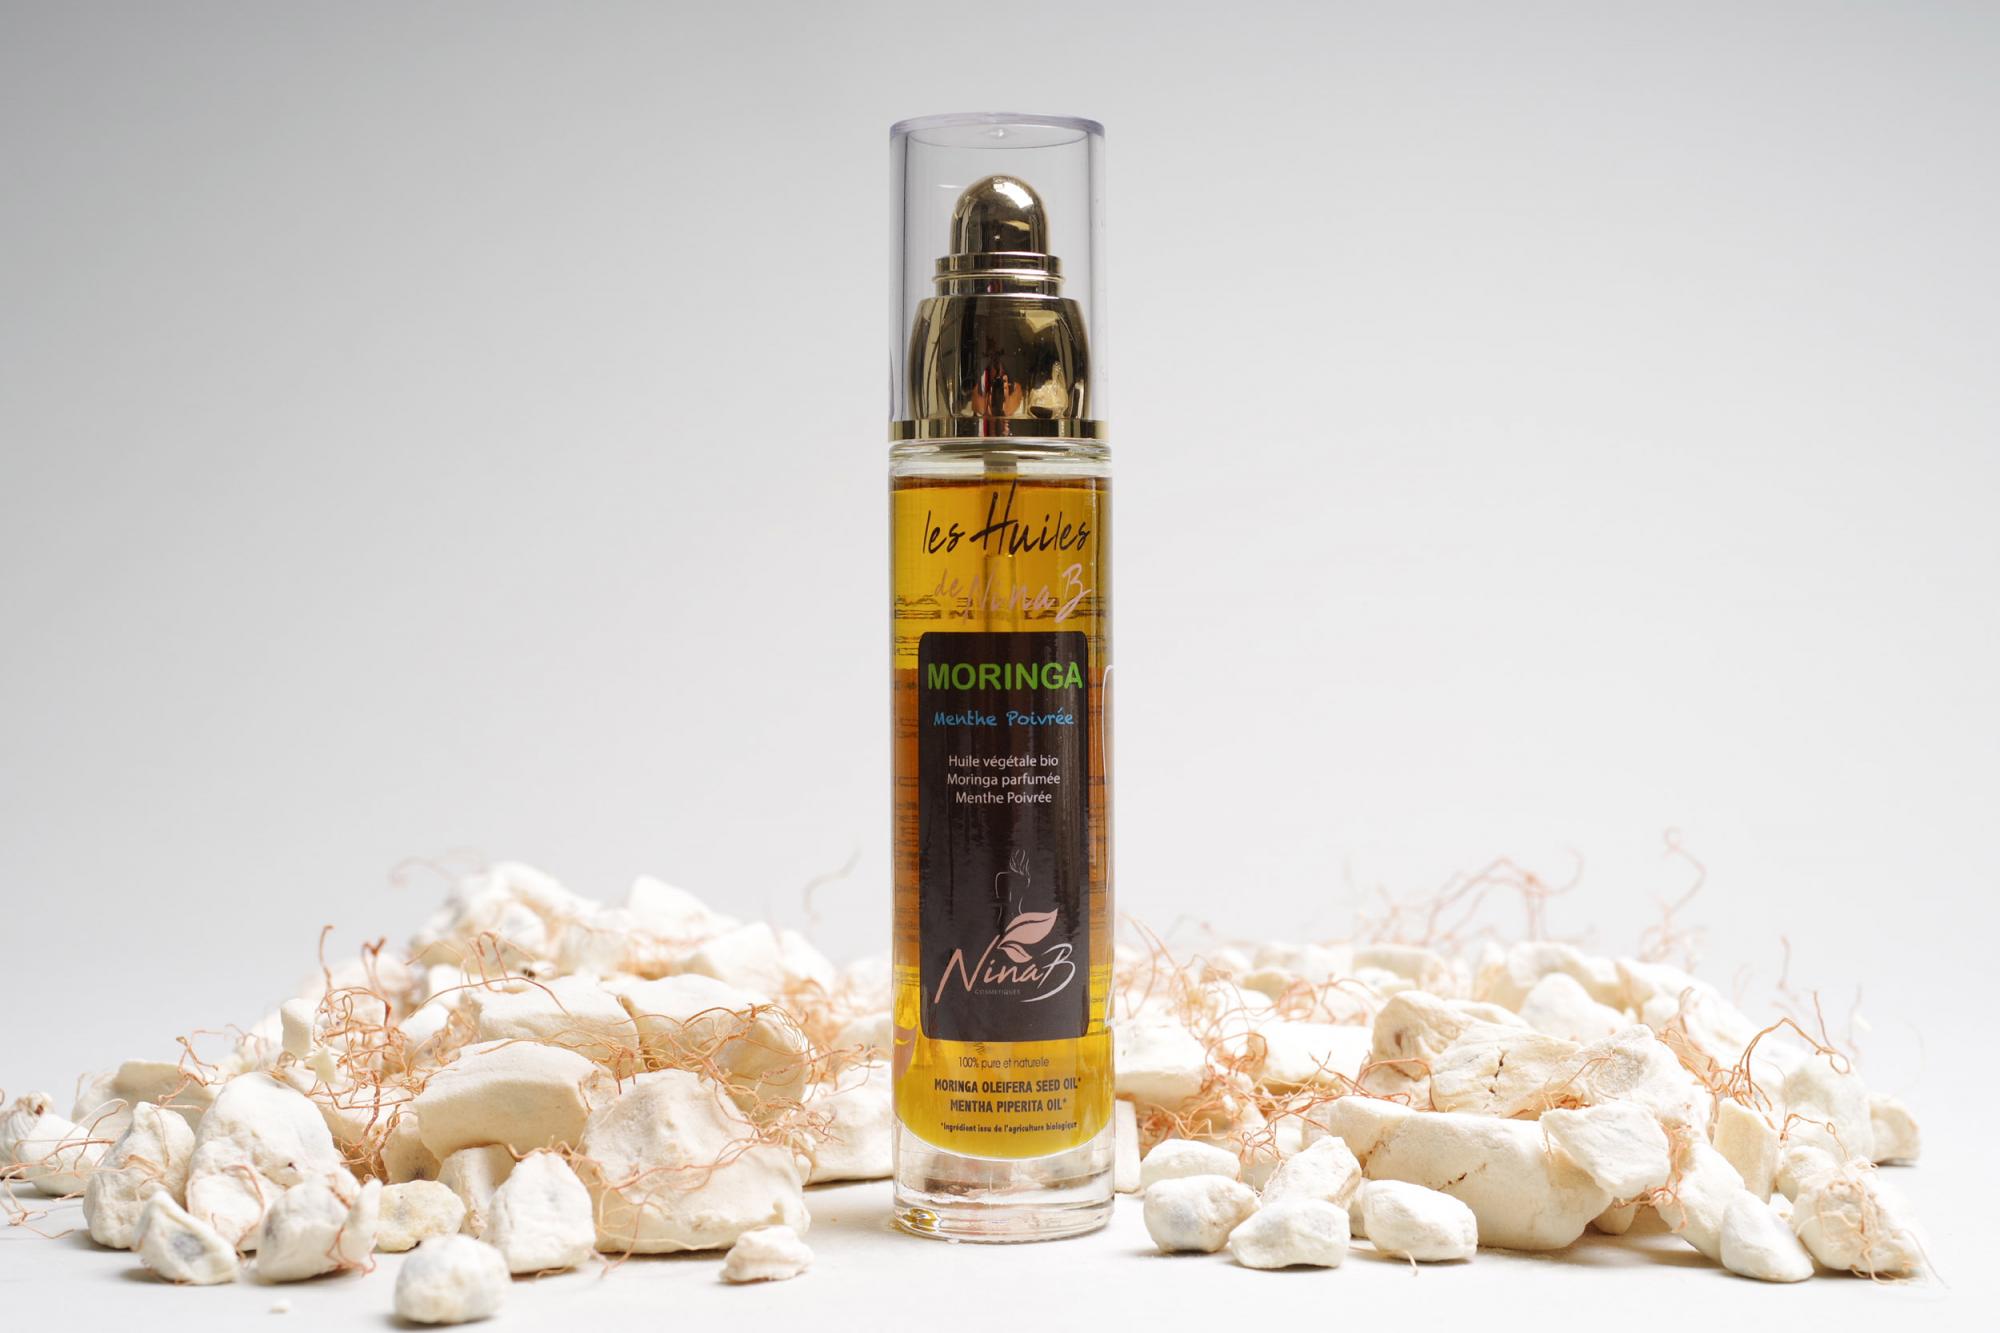 Moringa Oil with Organic Peppermint extracts - Natural, organic cosmetic product, certified ECOCERT COSMOS ORGANIC